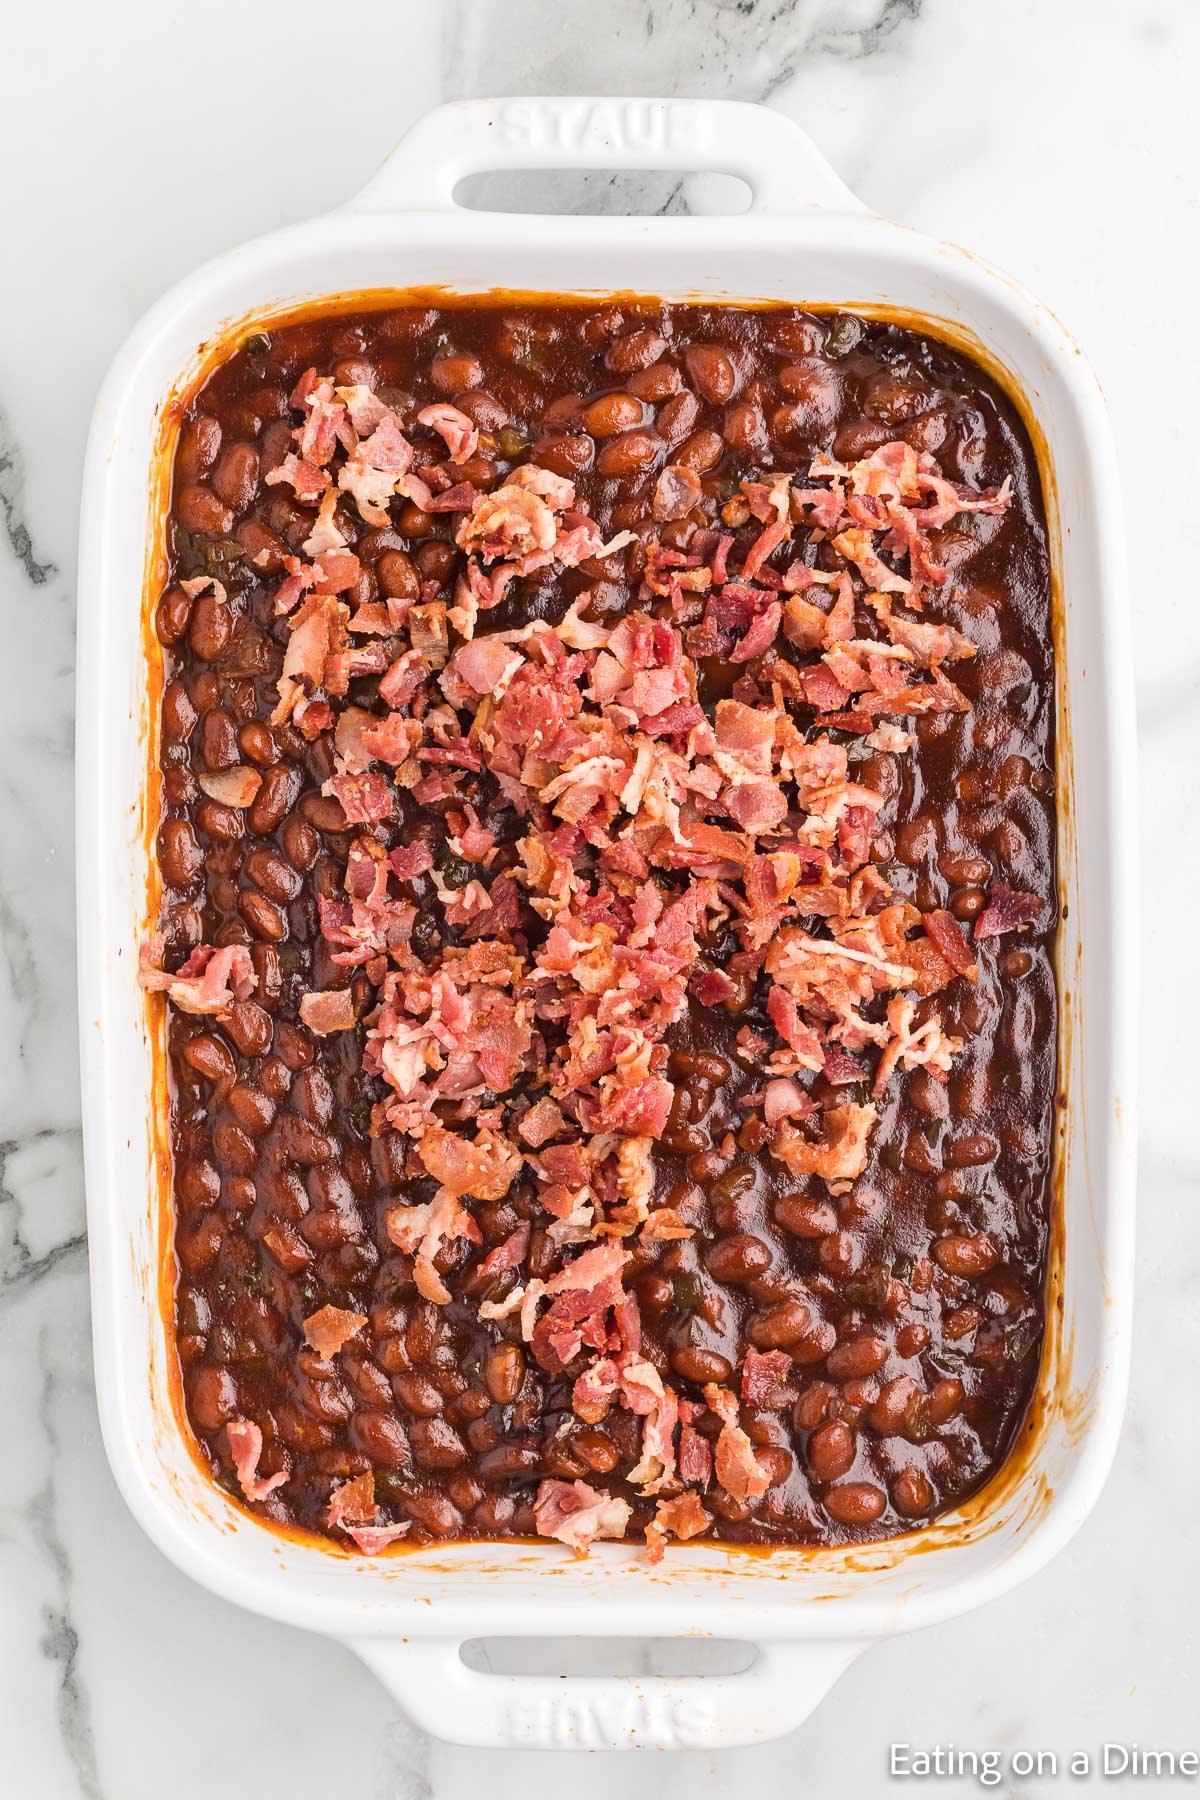 Baked beans in a casserole dish topped with chopped bacon